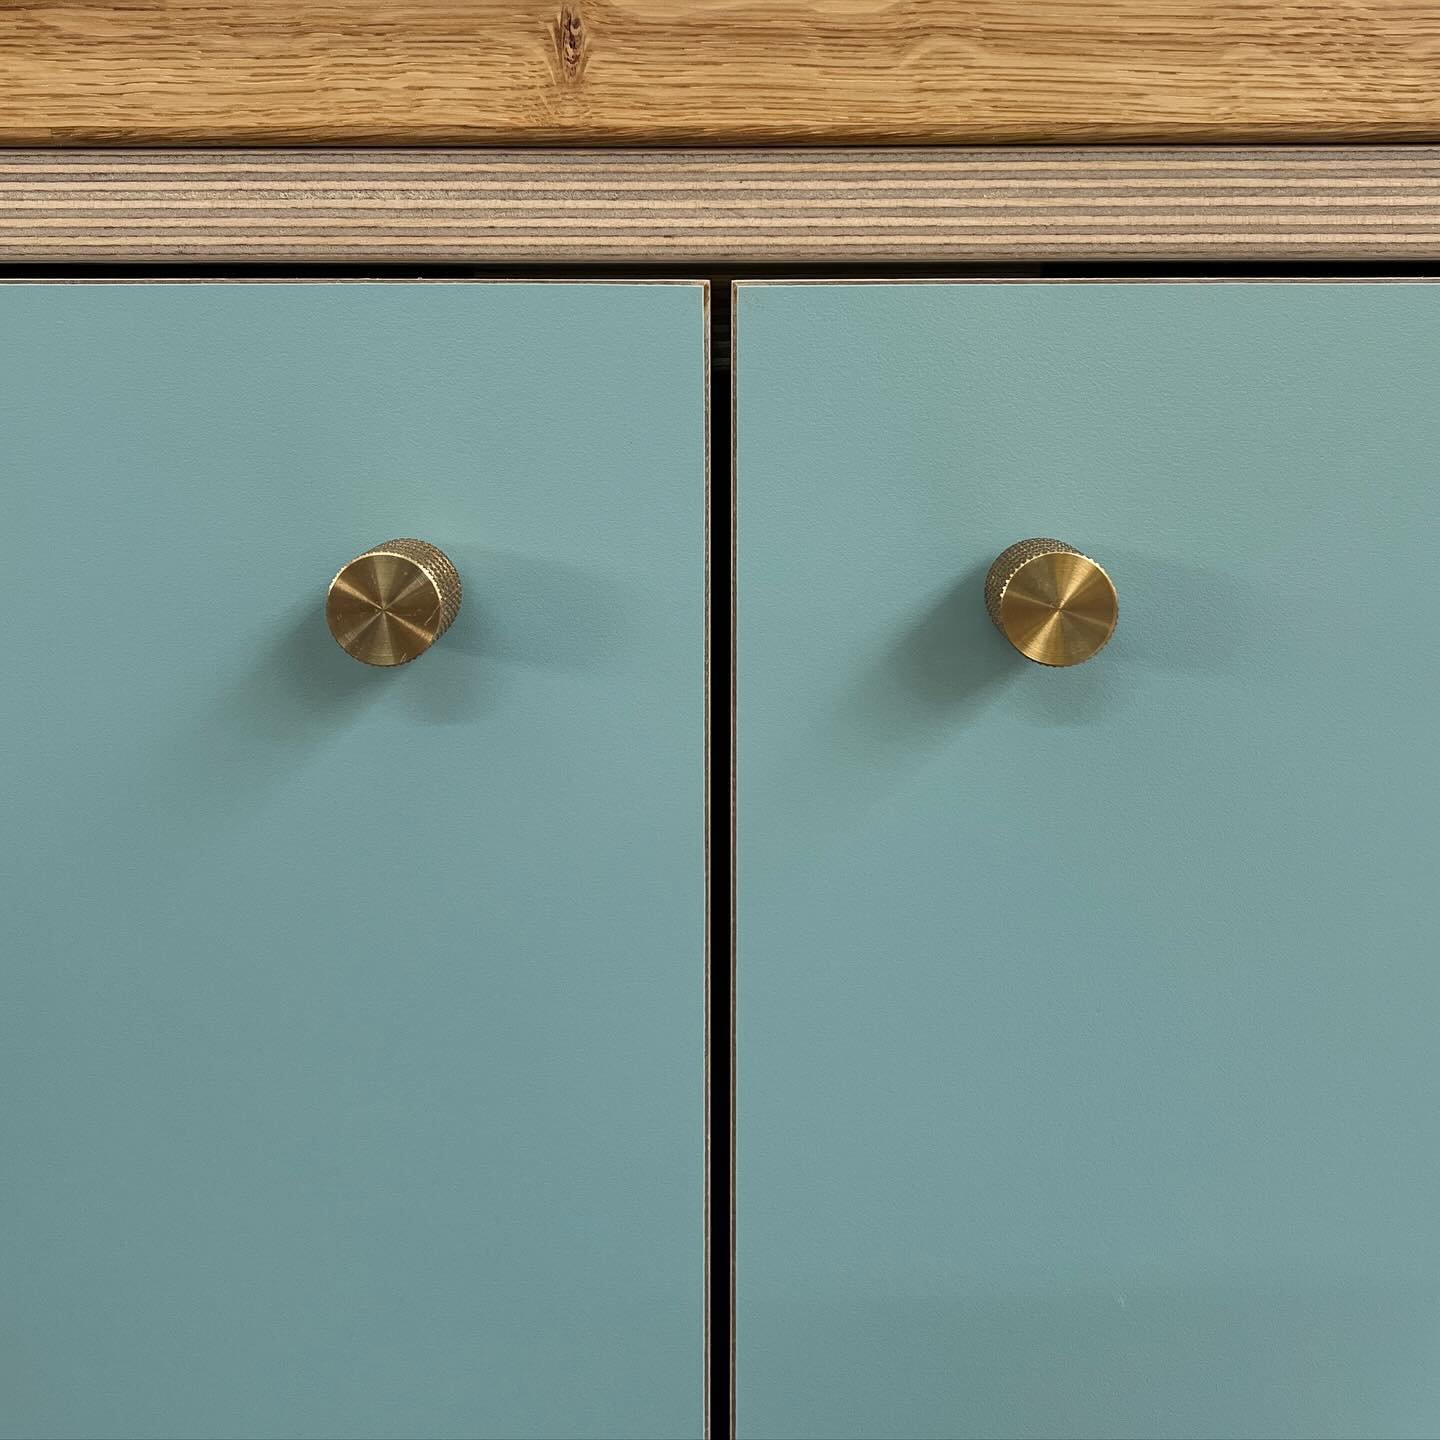 @formicagroupeu dusty jade and brass knobs from @dowsingandreynolds looking great together. #alltheappropriatehashtags